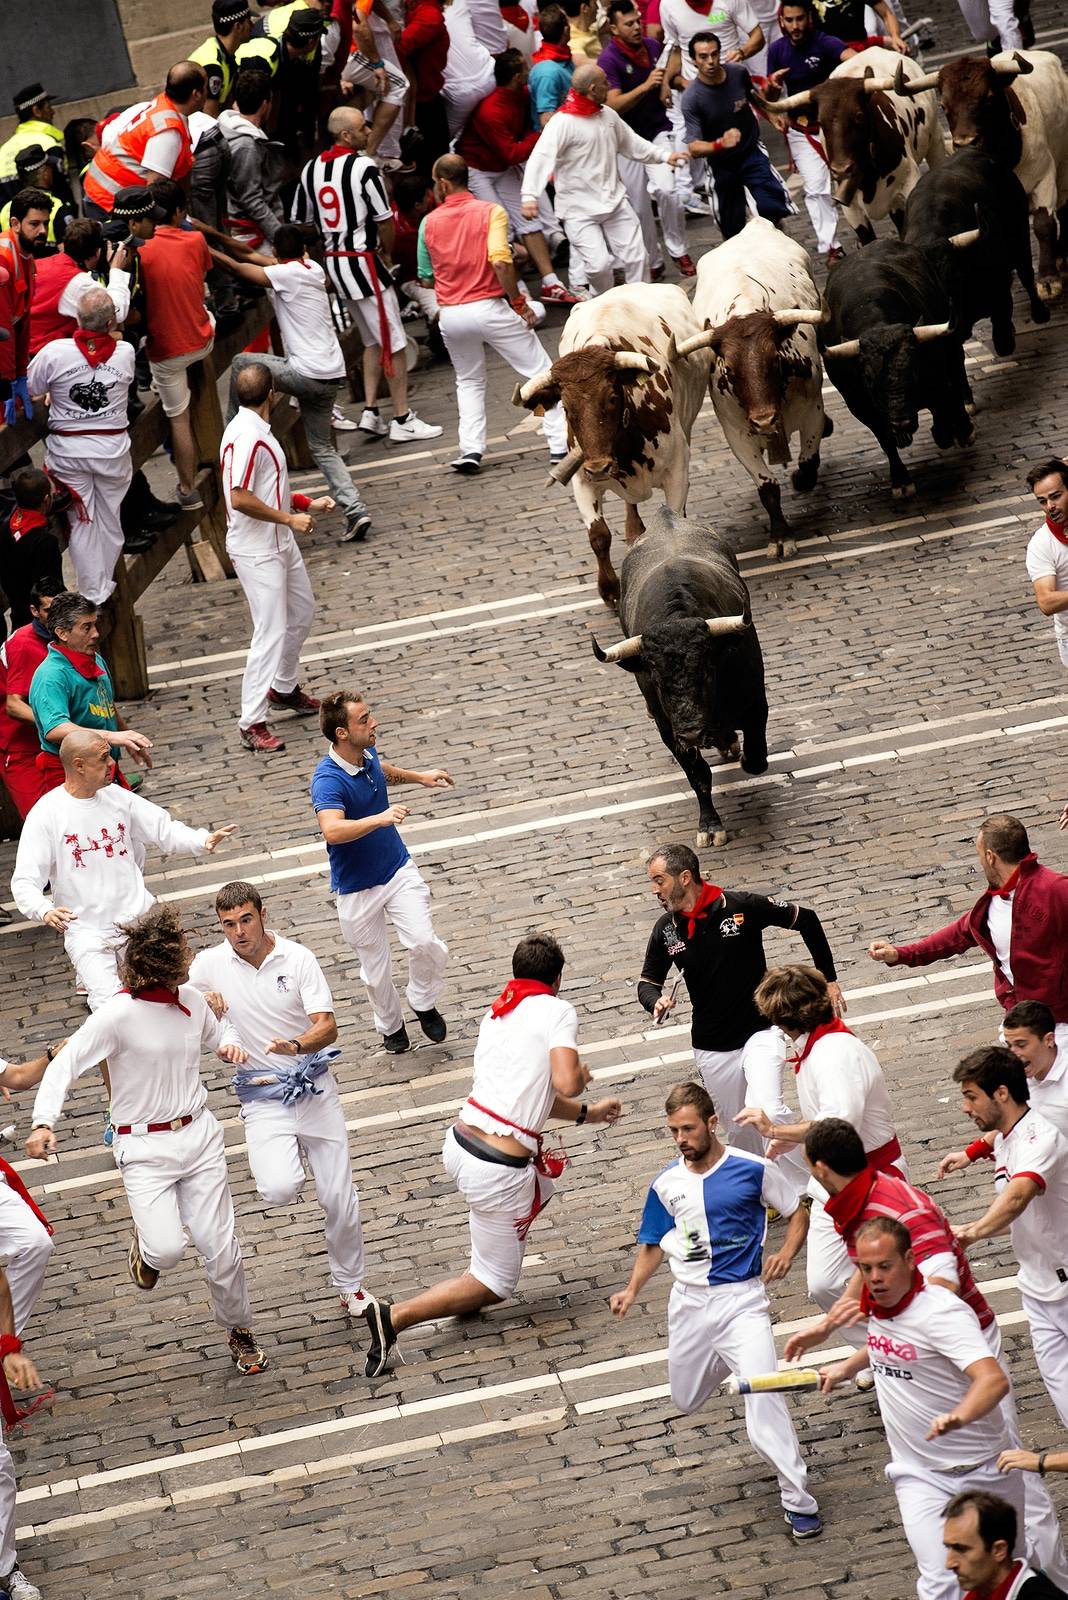 The Dangers of Running of the Bulls, is it worth it?